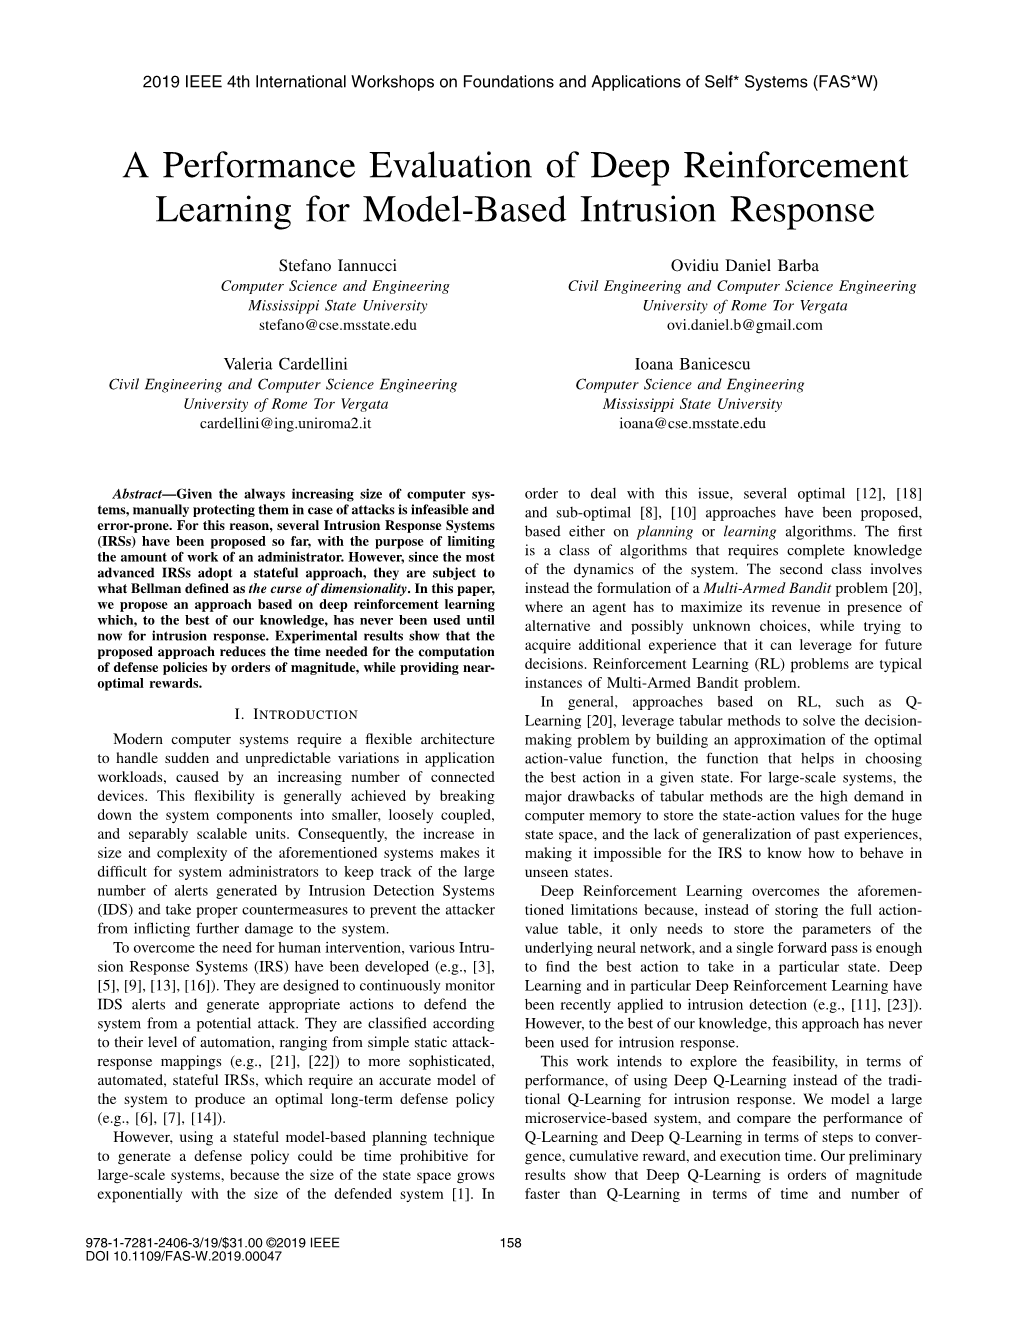 A Performance Evaluation of Deep Reinforcement Learning for Model-Based Intrusion Response